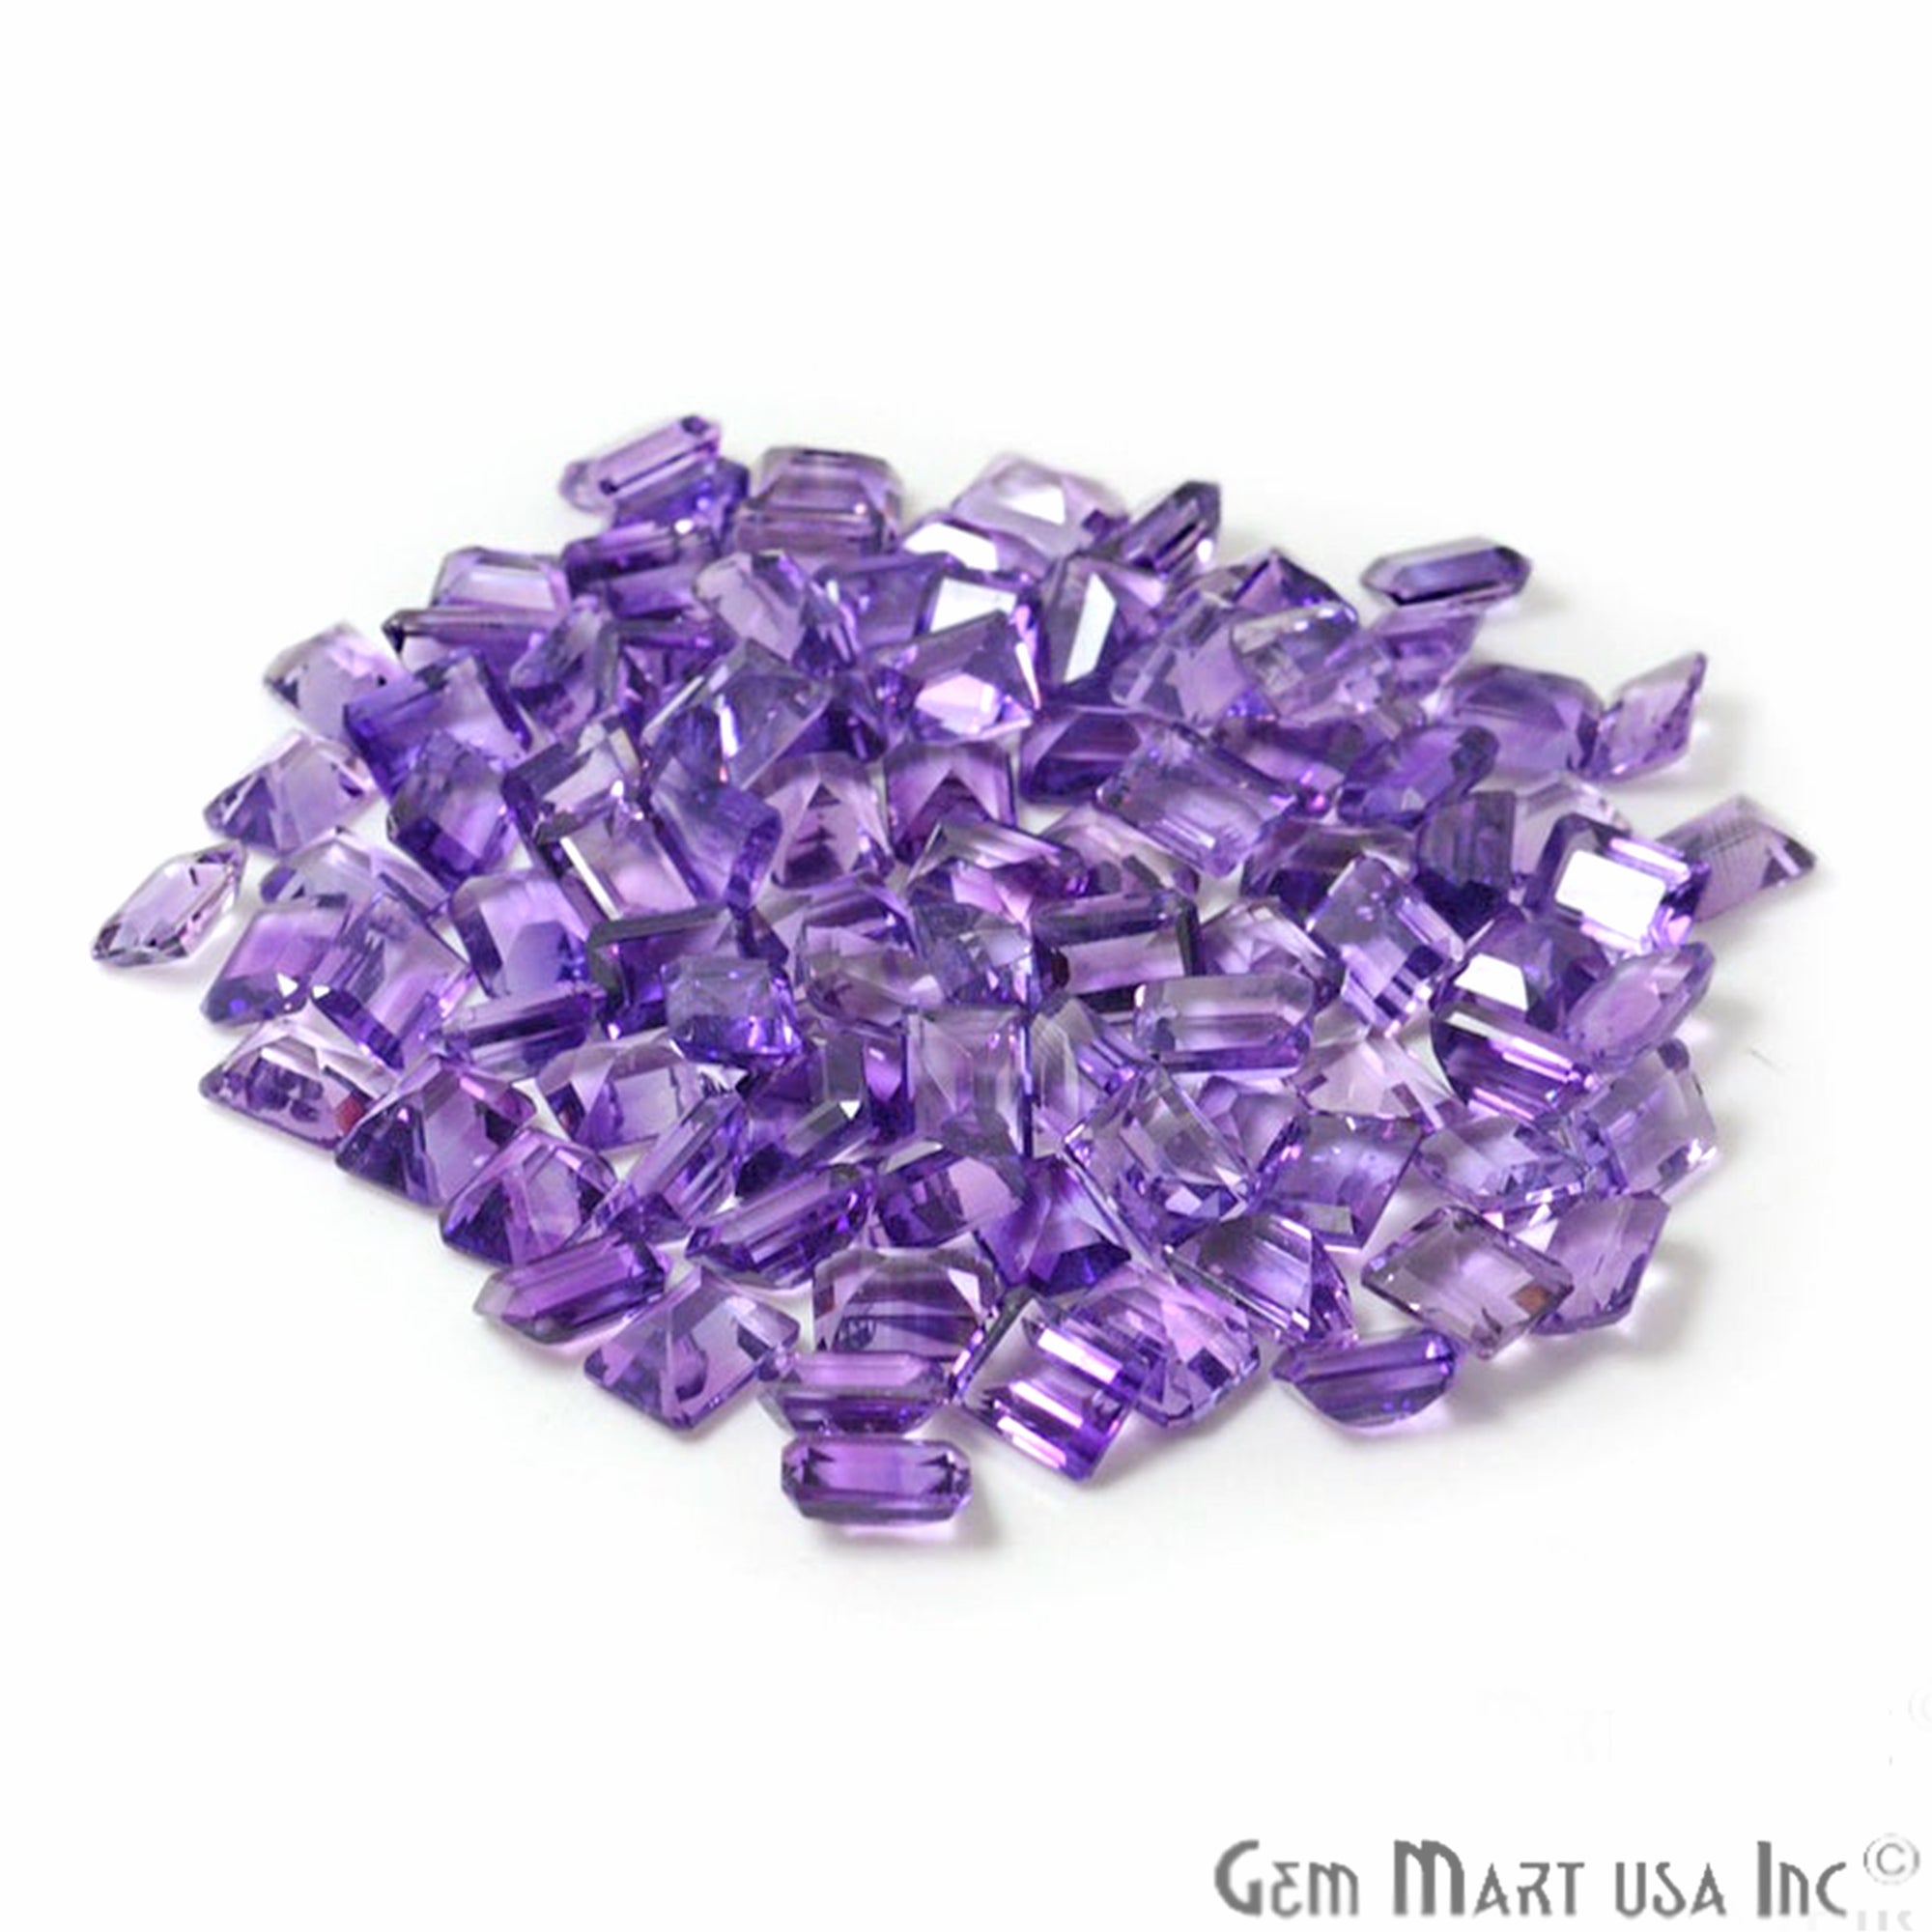 20 cts Amethyst Octagon 6x8, Loose Faceted Stone, Amethyst Mix, Amazing Cut and Quality - GemMartUSA